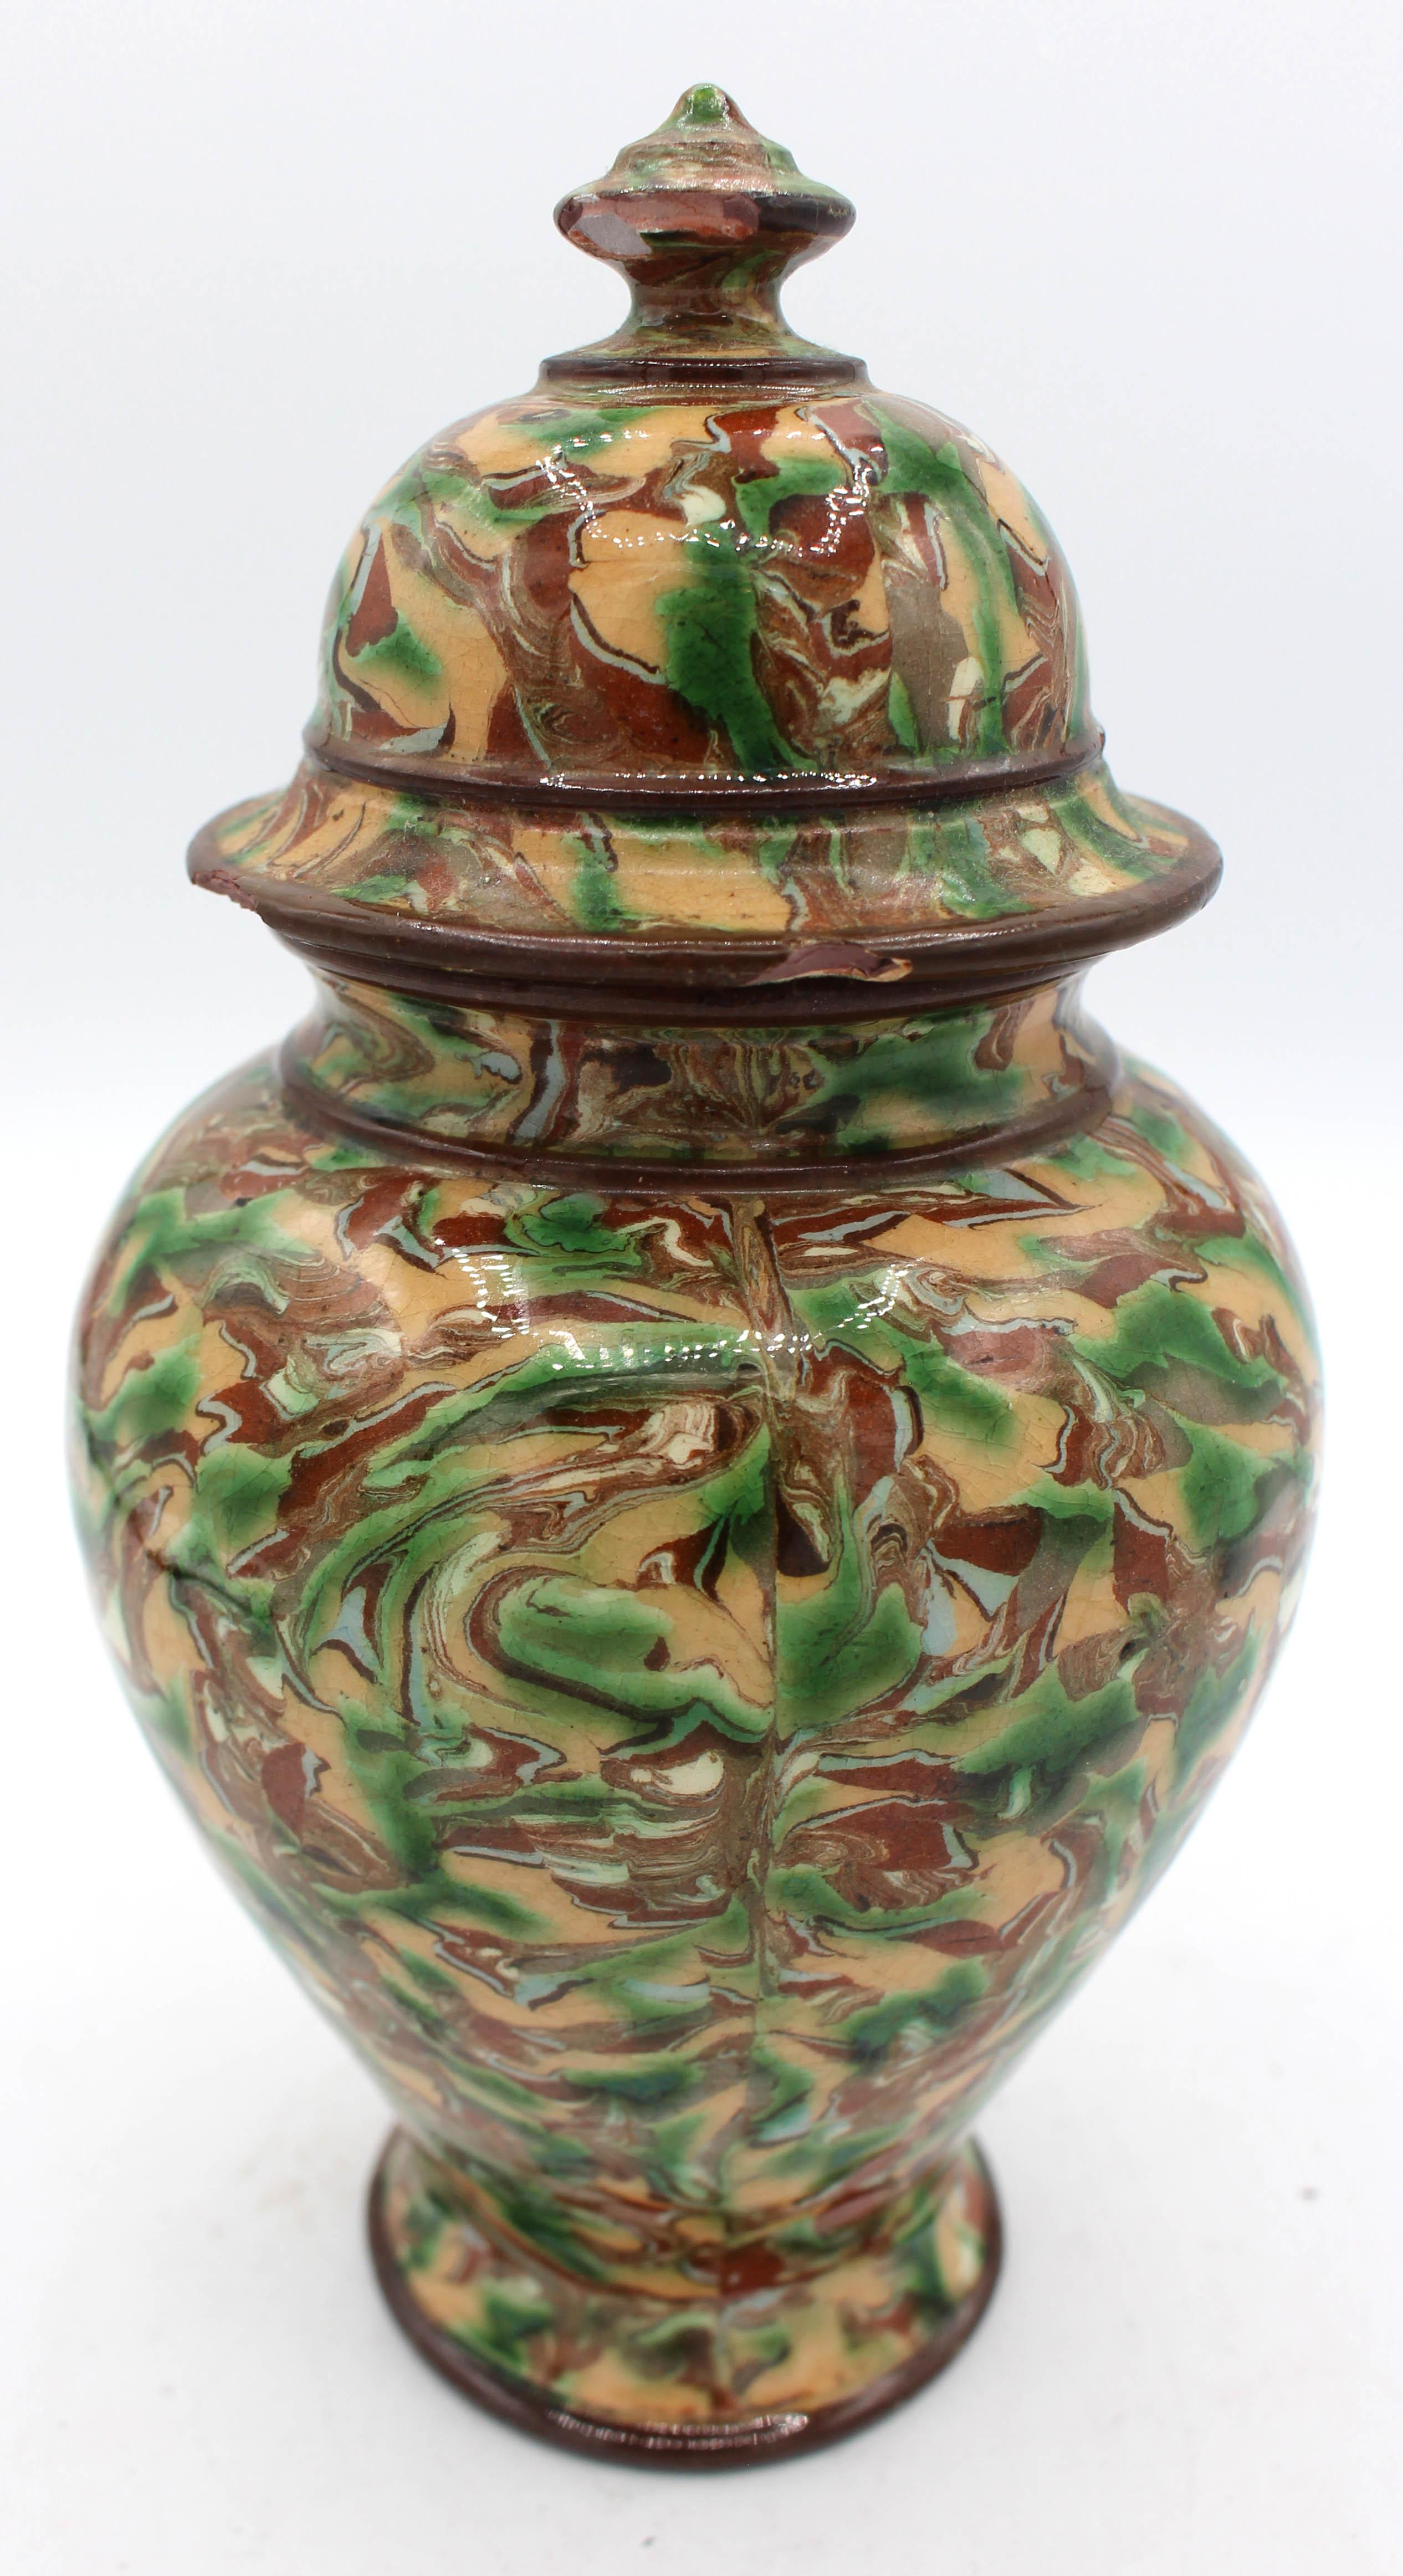 20th Century Circa 1900 Terracotta Covered Jar, French, by Maison Pichon Uzes For Sale